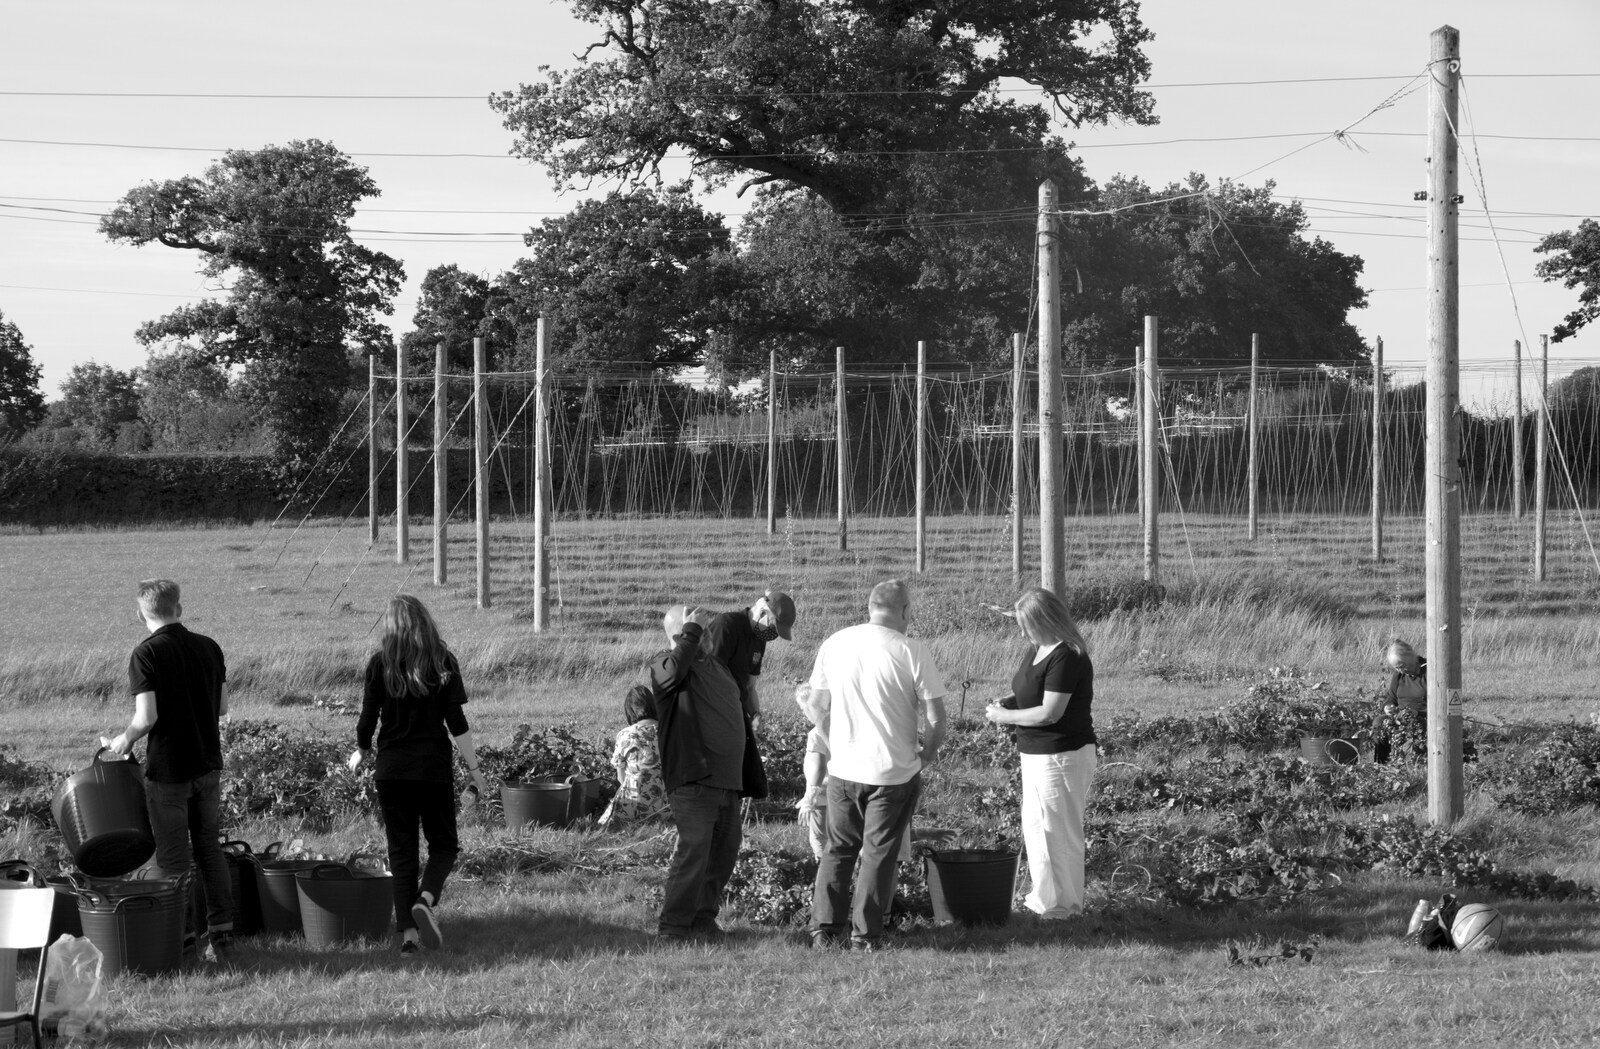 More hop picking amongst the wires from Star Wing's Hops and Hogs Festival, Redgrave, Suffolk - 12th September 2020